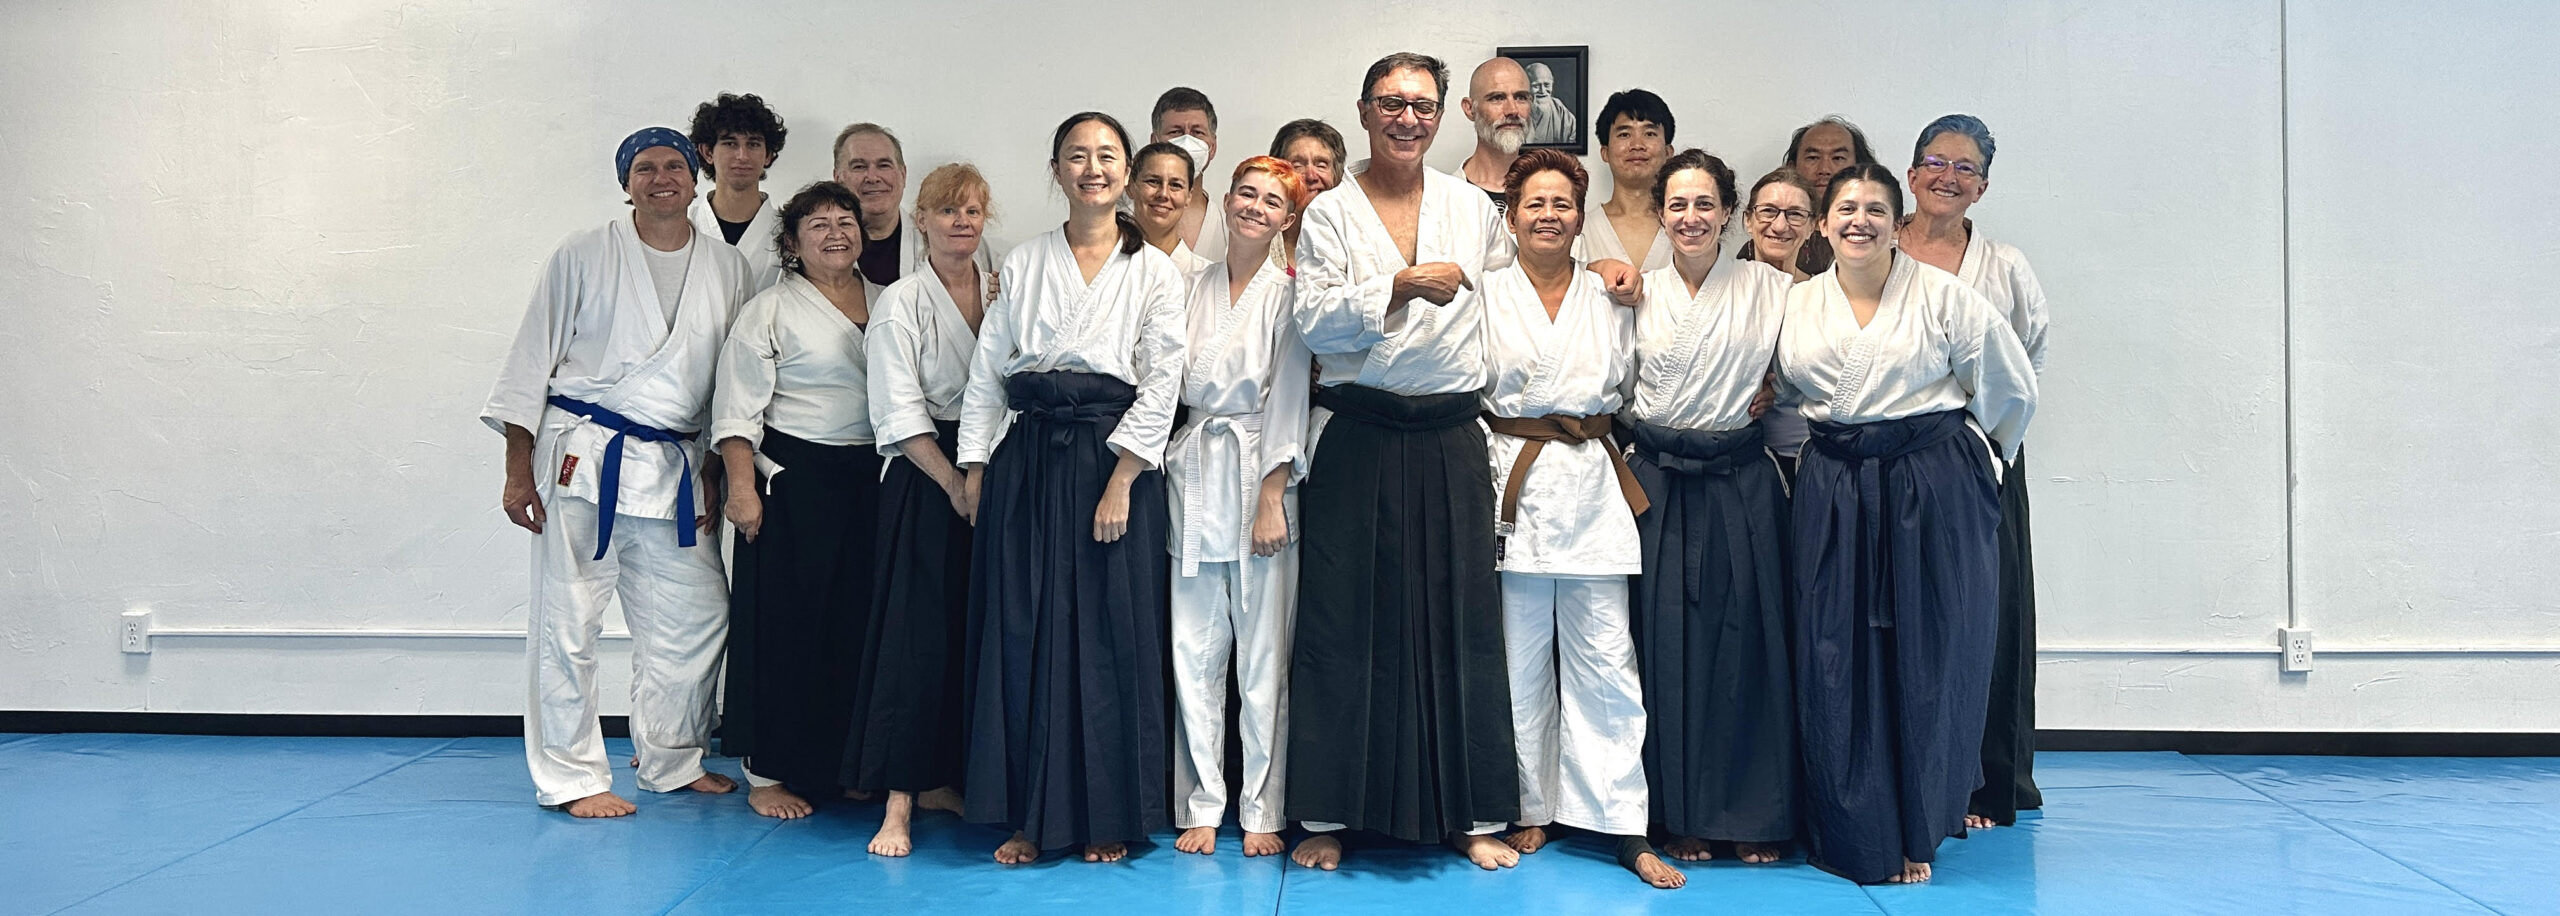 Group photo of members of Aikido of San Diego, on the mat and dressed in training uniforms, following Ana Allen's 1st-kyu exam. Photo by Christine Cessna.